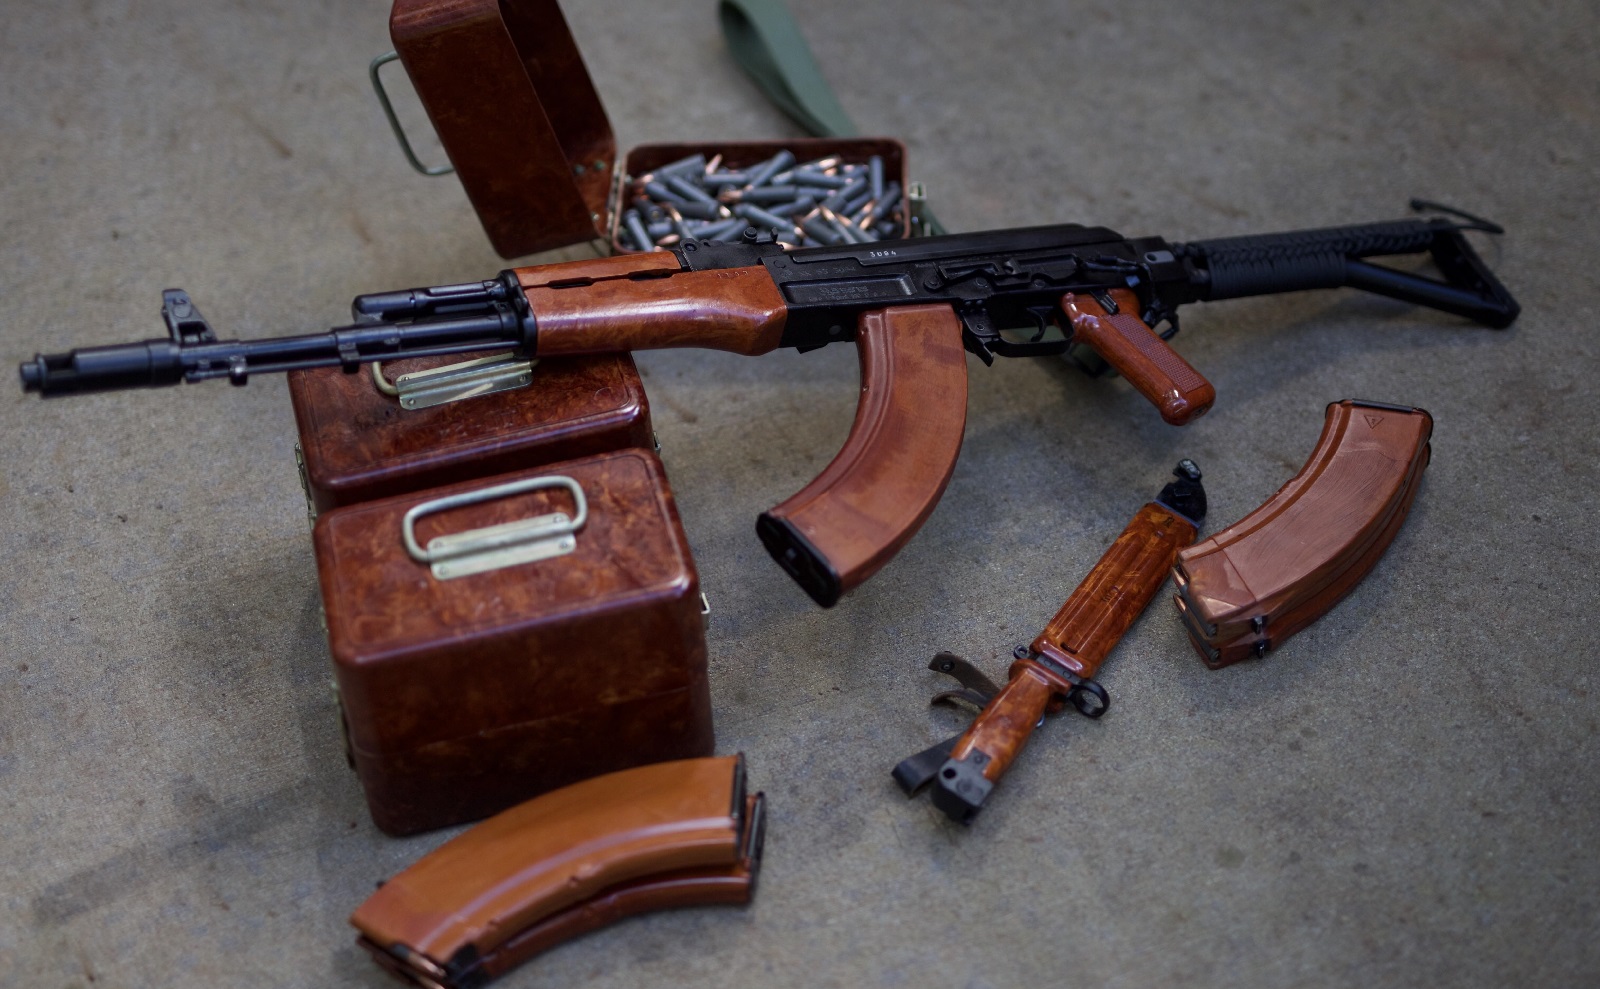 Bang Met The 5 Deadliest Ak 47s On The Planet The National Interest